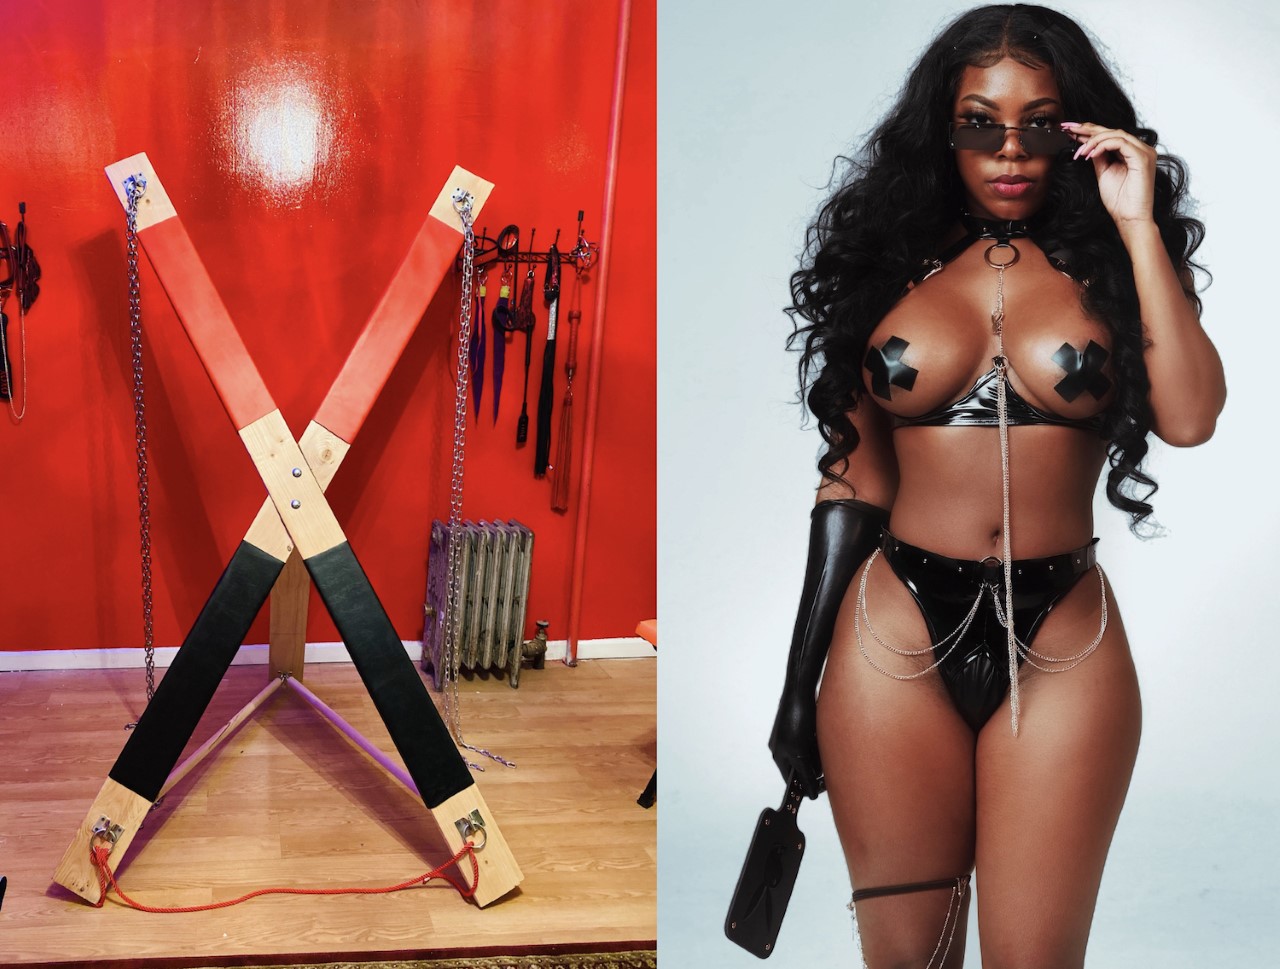 Mistress Marley Expands Her Empire & Helps Community with Brooklyn’s Whipz Dungeon